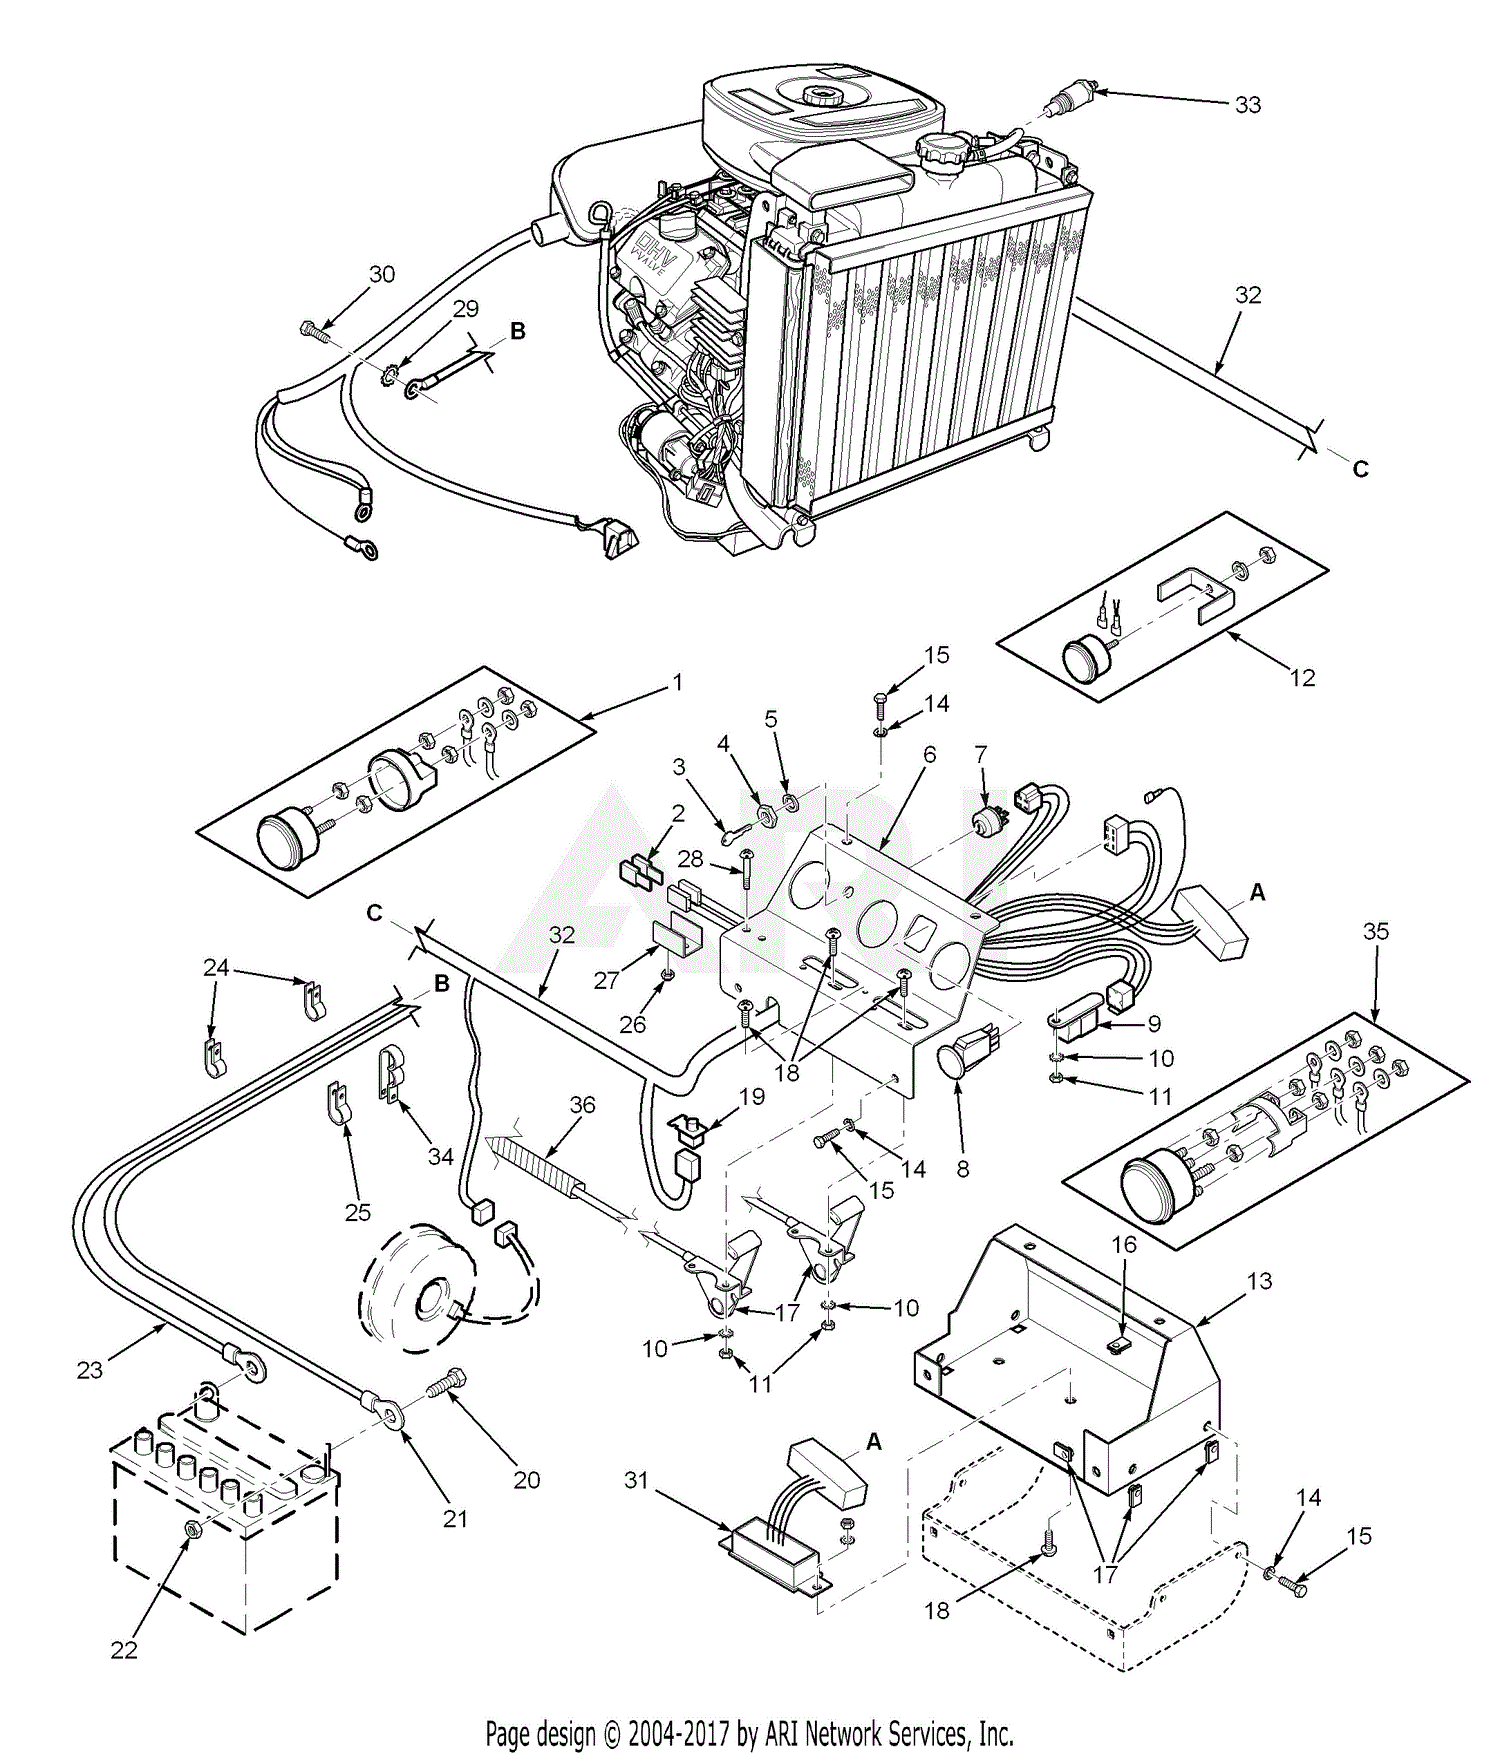 Scag STT52A-23KA (S/N 7200001-7209999) Parts Diagram for Electrical ...